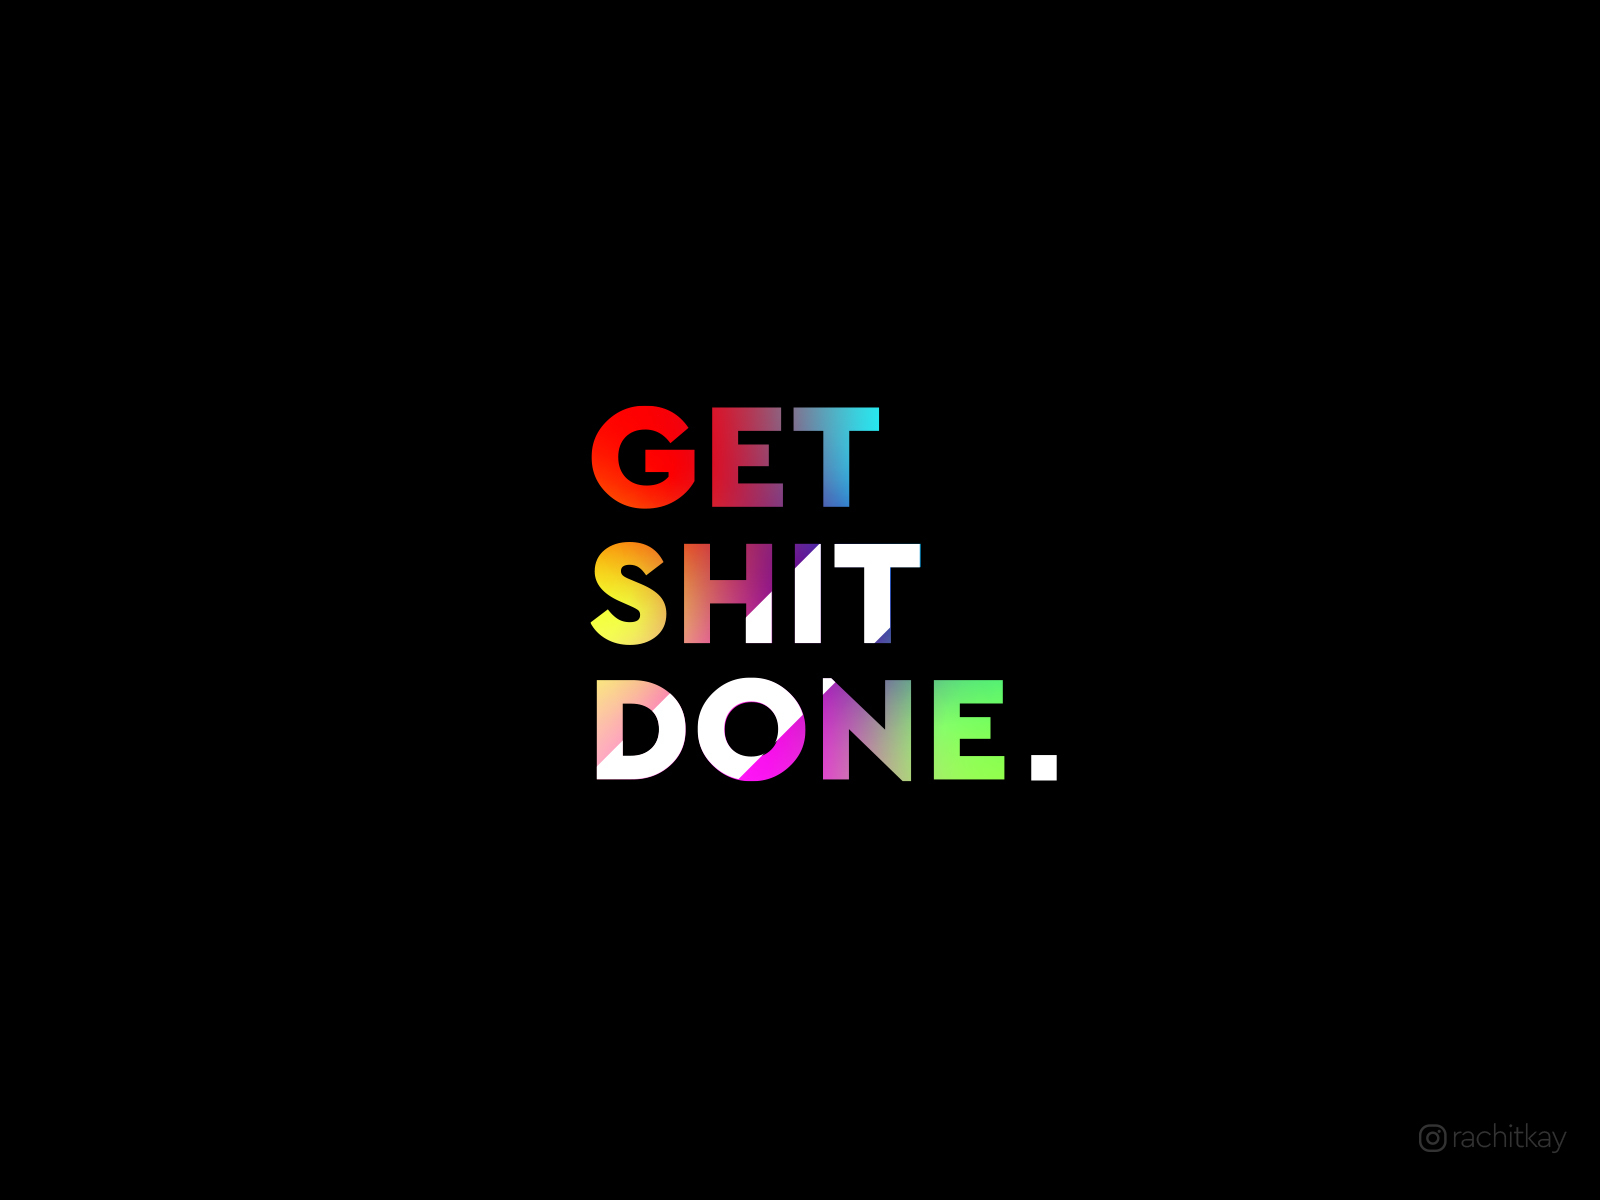 Get Shit Done. by Rachit Khurana on Dribbble